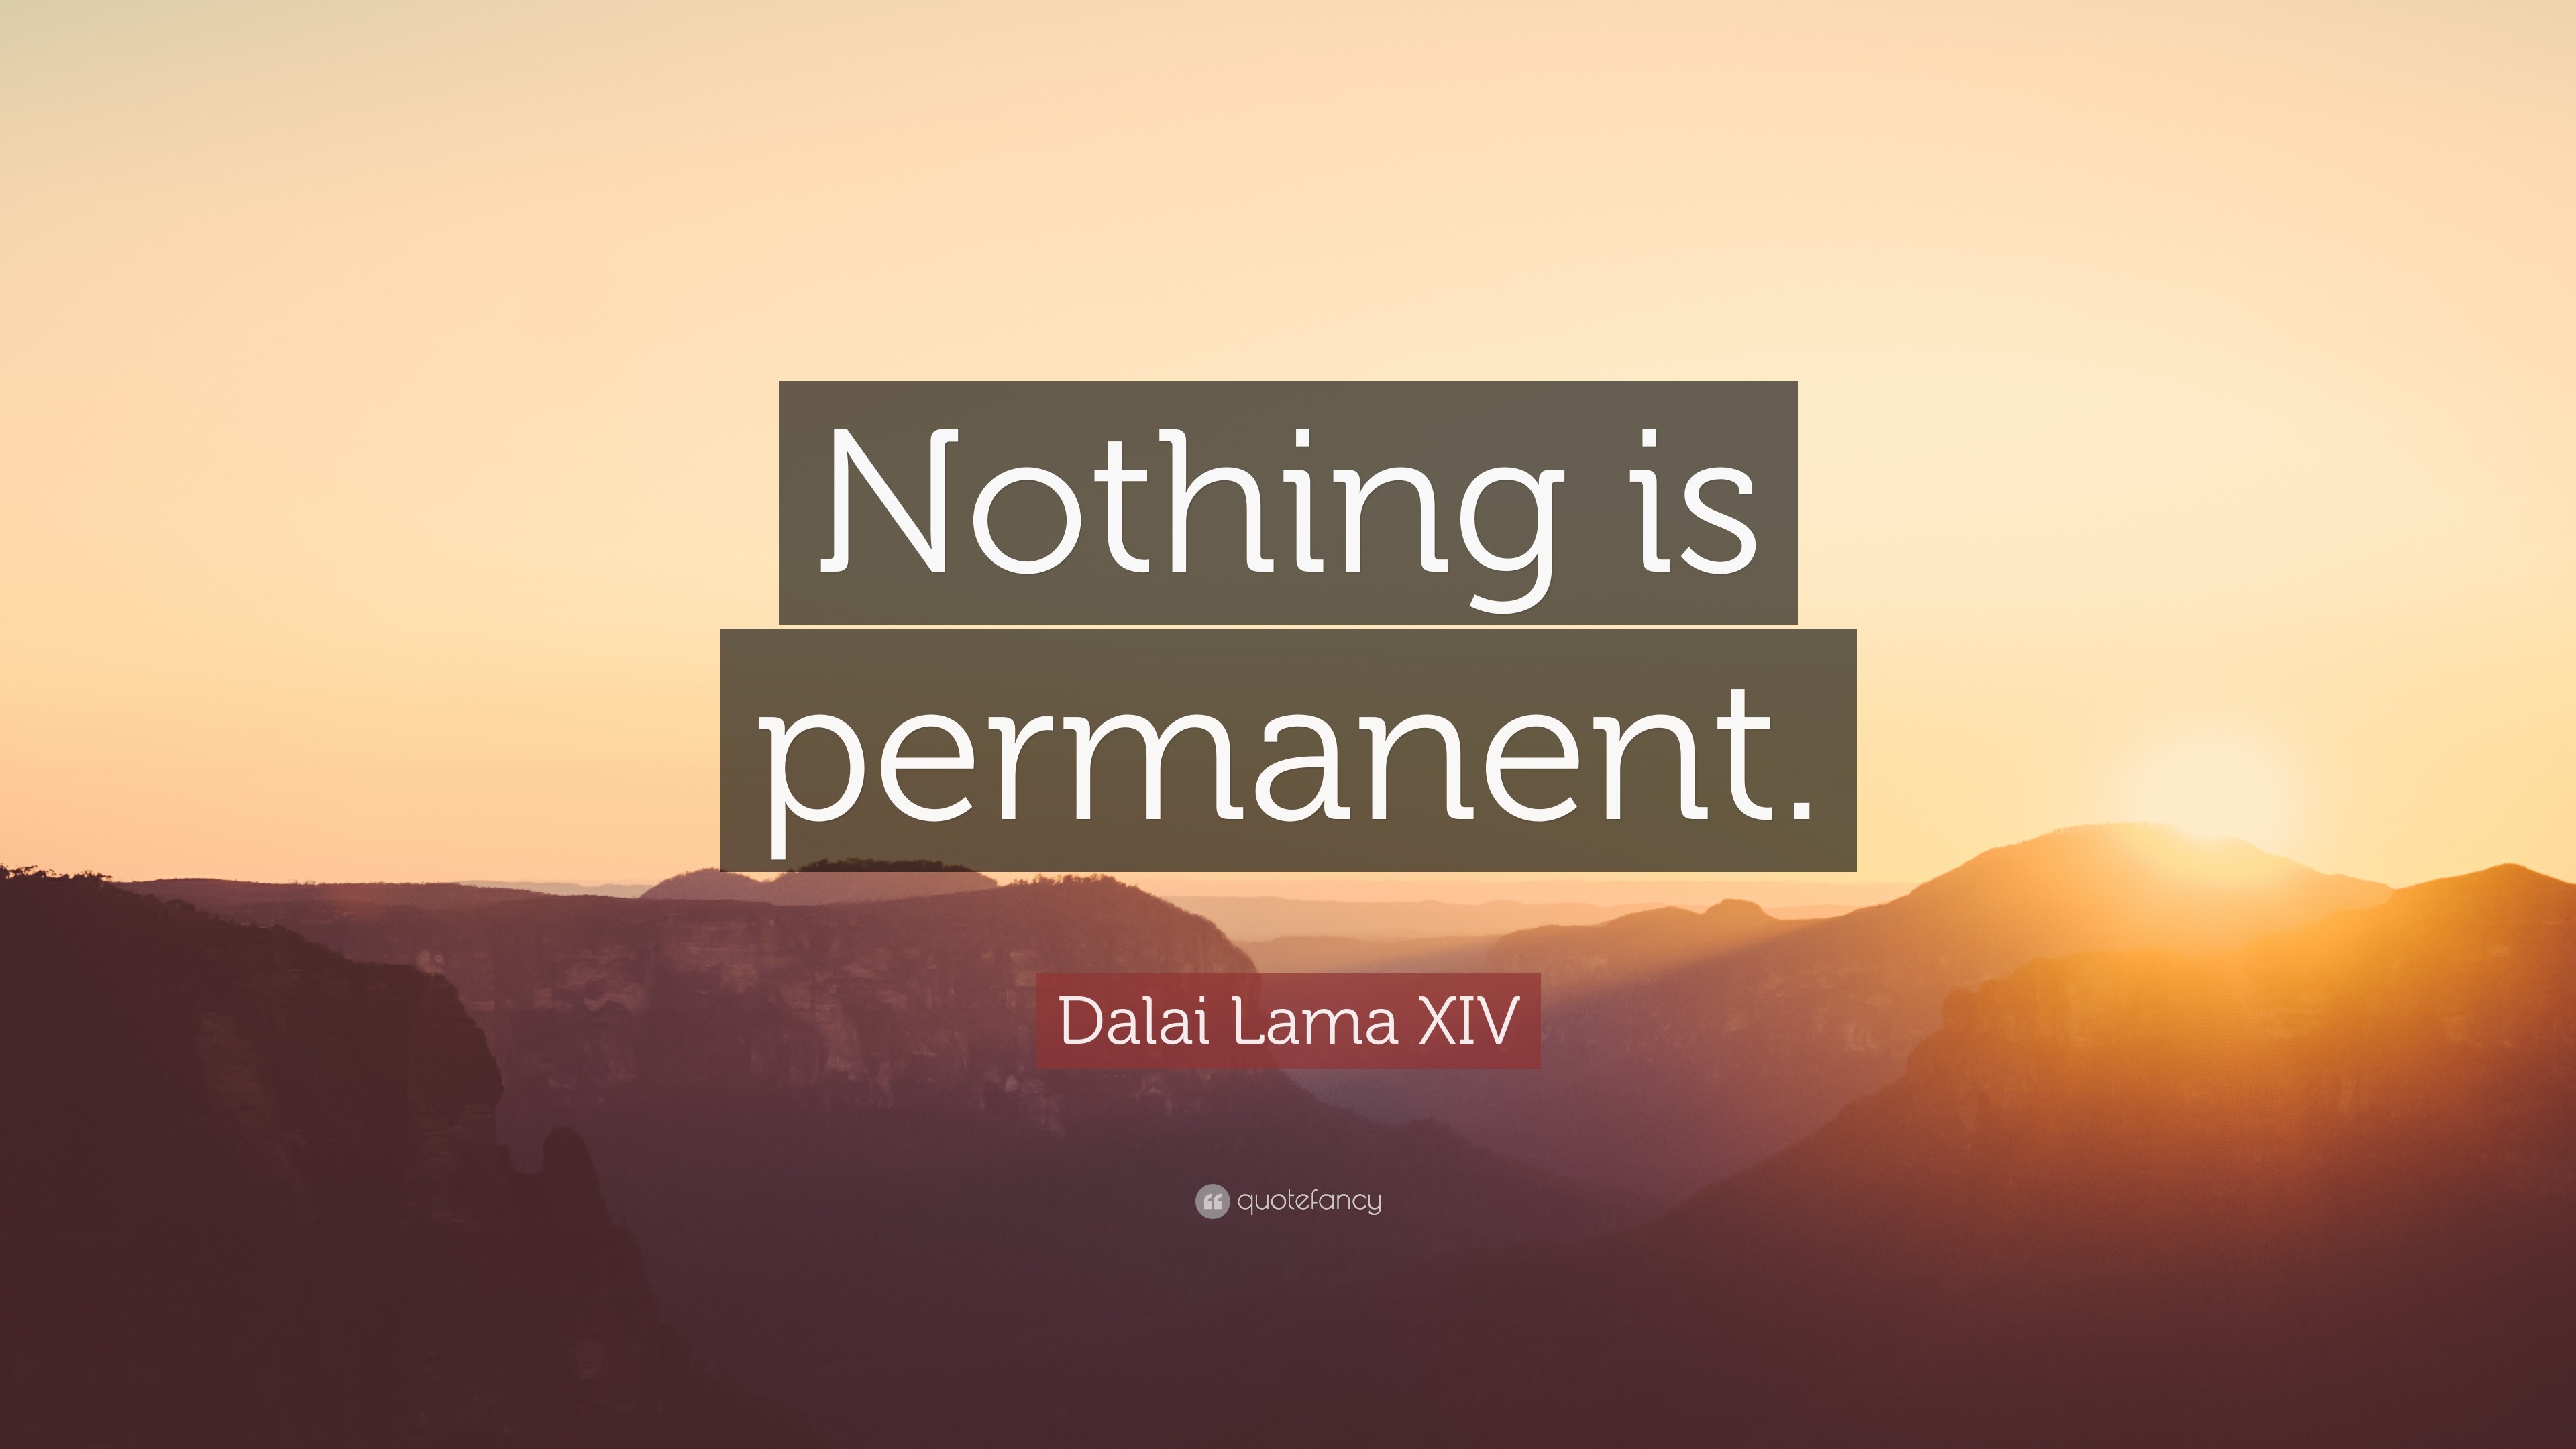 Dalai Lama XIV Quote: ‘Nothing is permanent.’